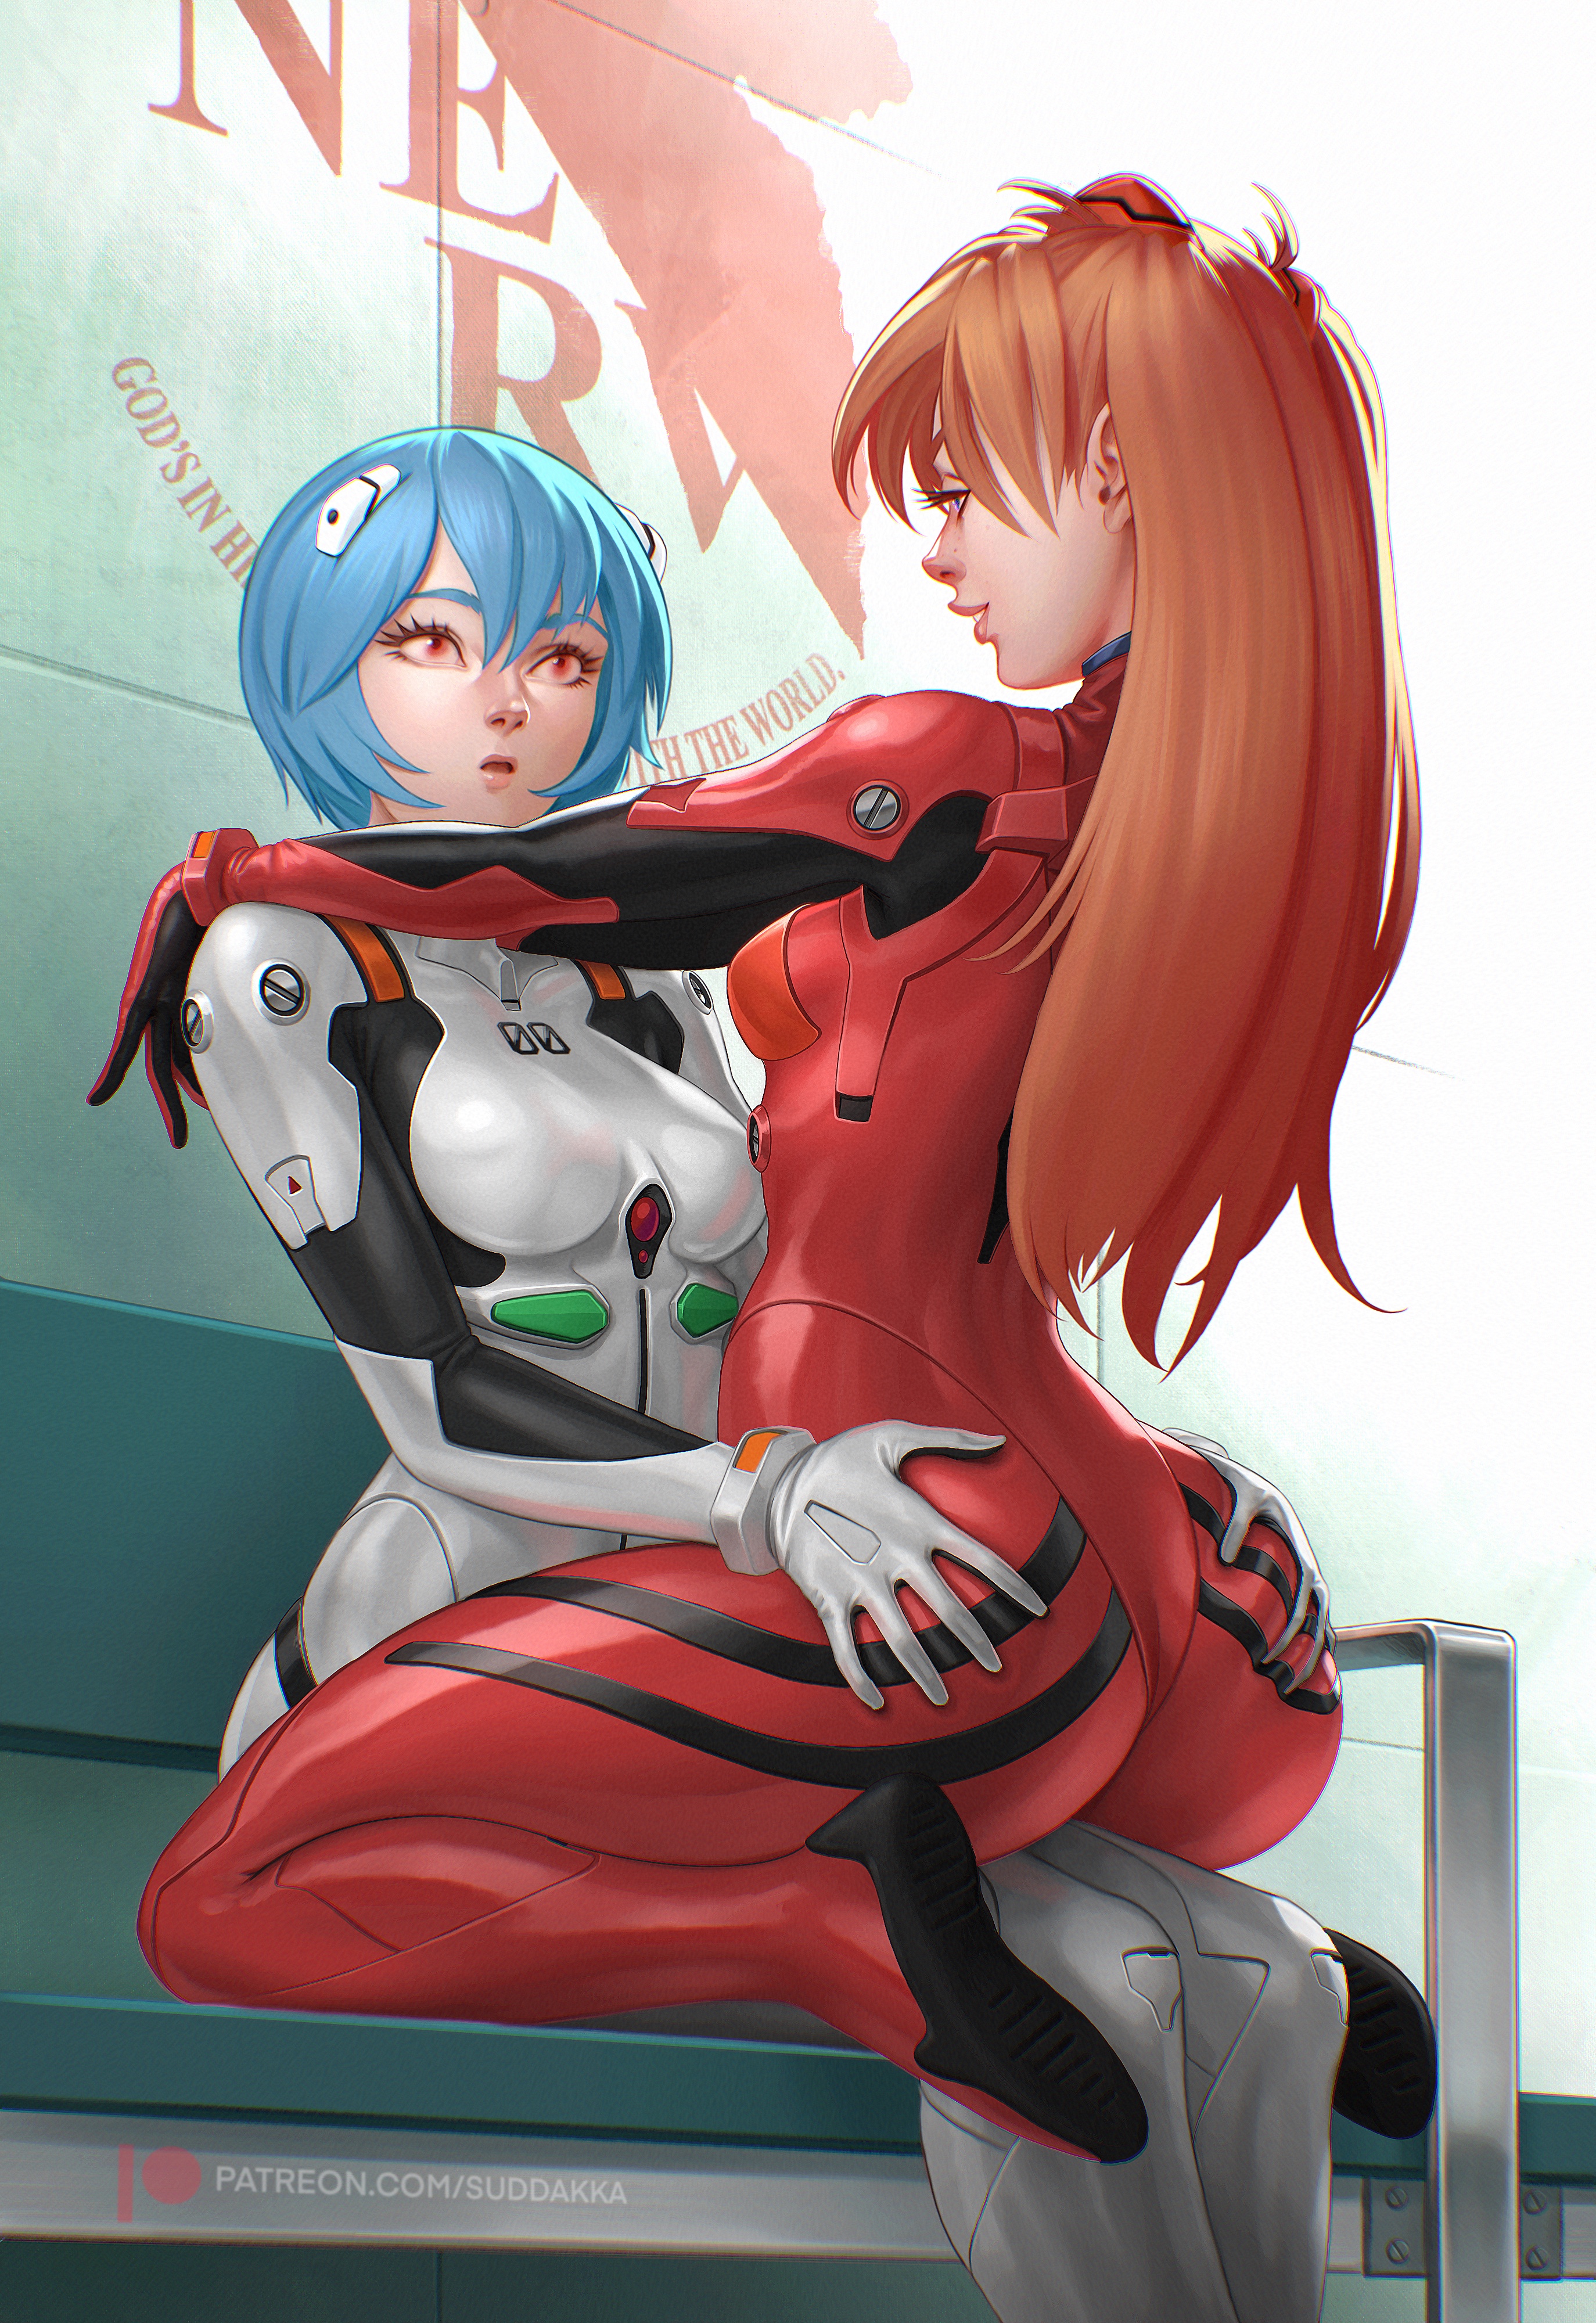 Anime 2748x4000 Suddakka Neon Genesis Evangelion Asuka Langley Soryu Ayanami Rei hands on ass plugsuit blue hair frontal view rear view long hair short hair sitting sitting backwards multiple characters anime girls looking away blue eyes red eyes freckles on bench watermarked thighs